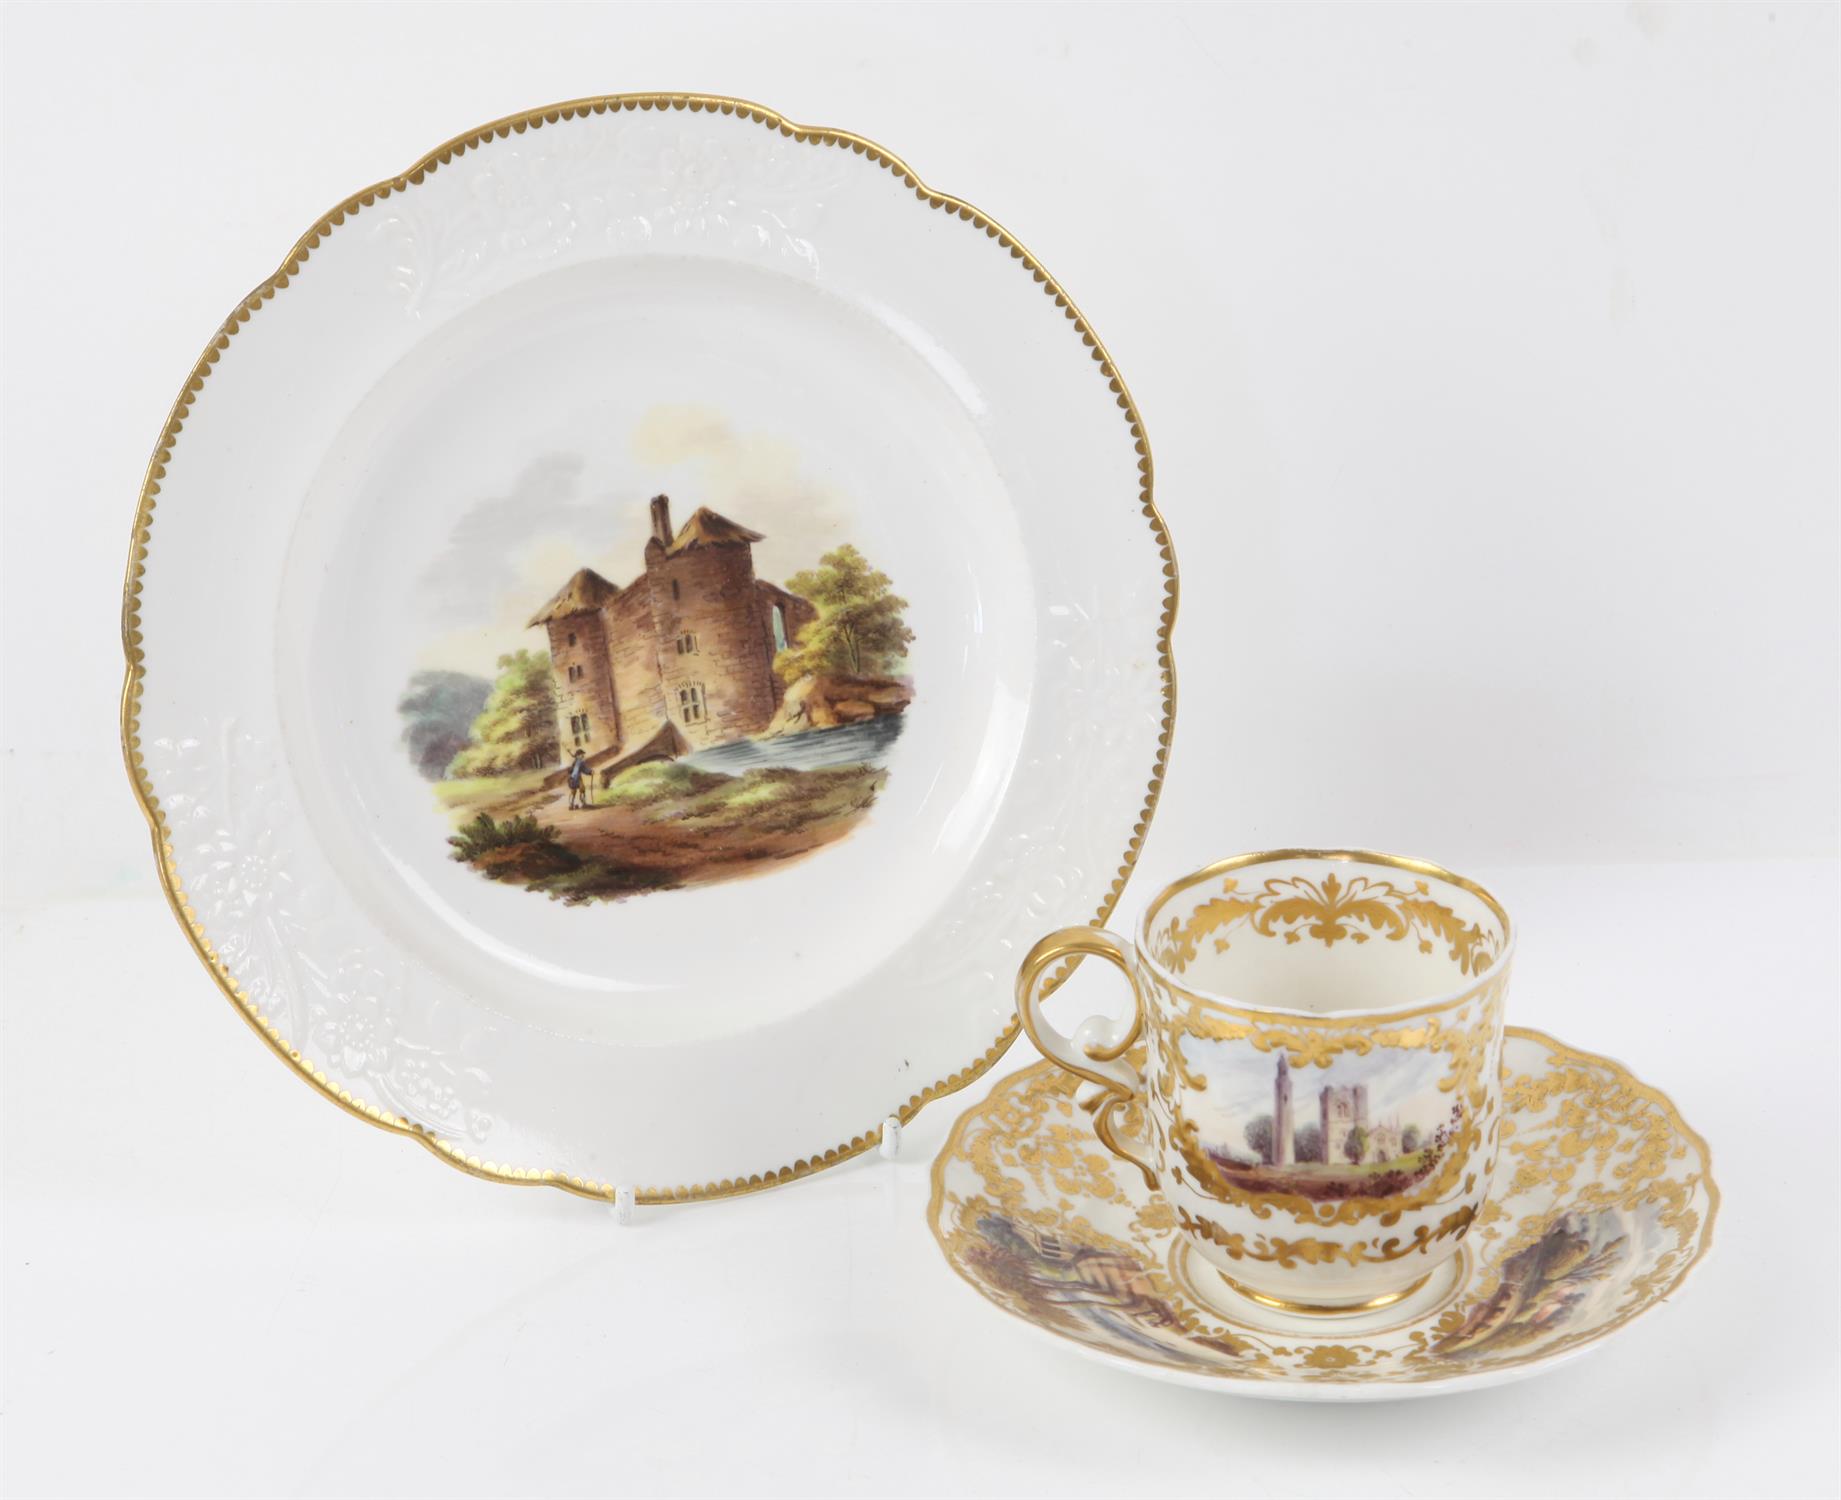 Spode tea cup and saucer, with foliate gilding and relief cartouches, the cup painted with 'Round